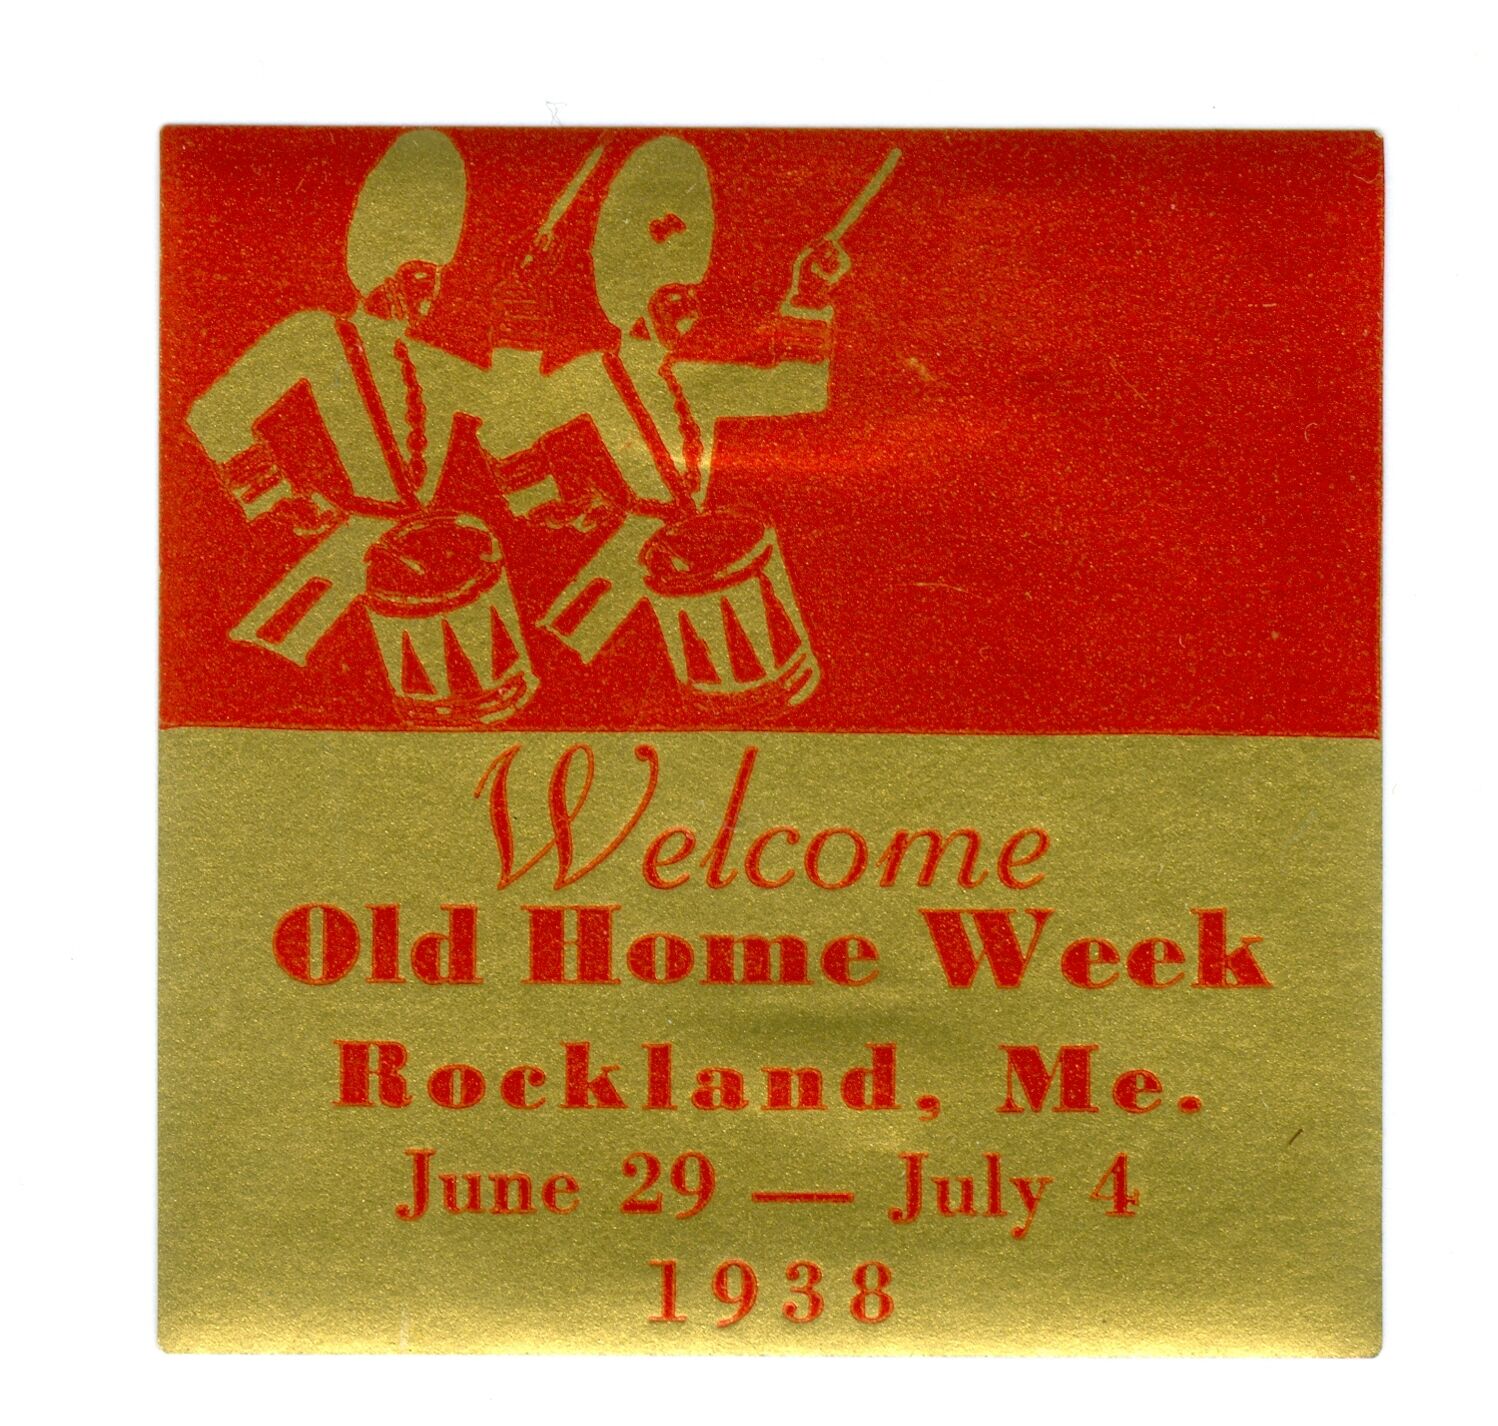 Unused June 29 To July 4, 1938 Rockland, Maine, Welcome Old Home Week Decal